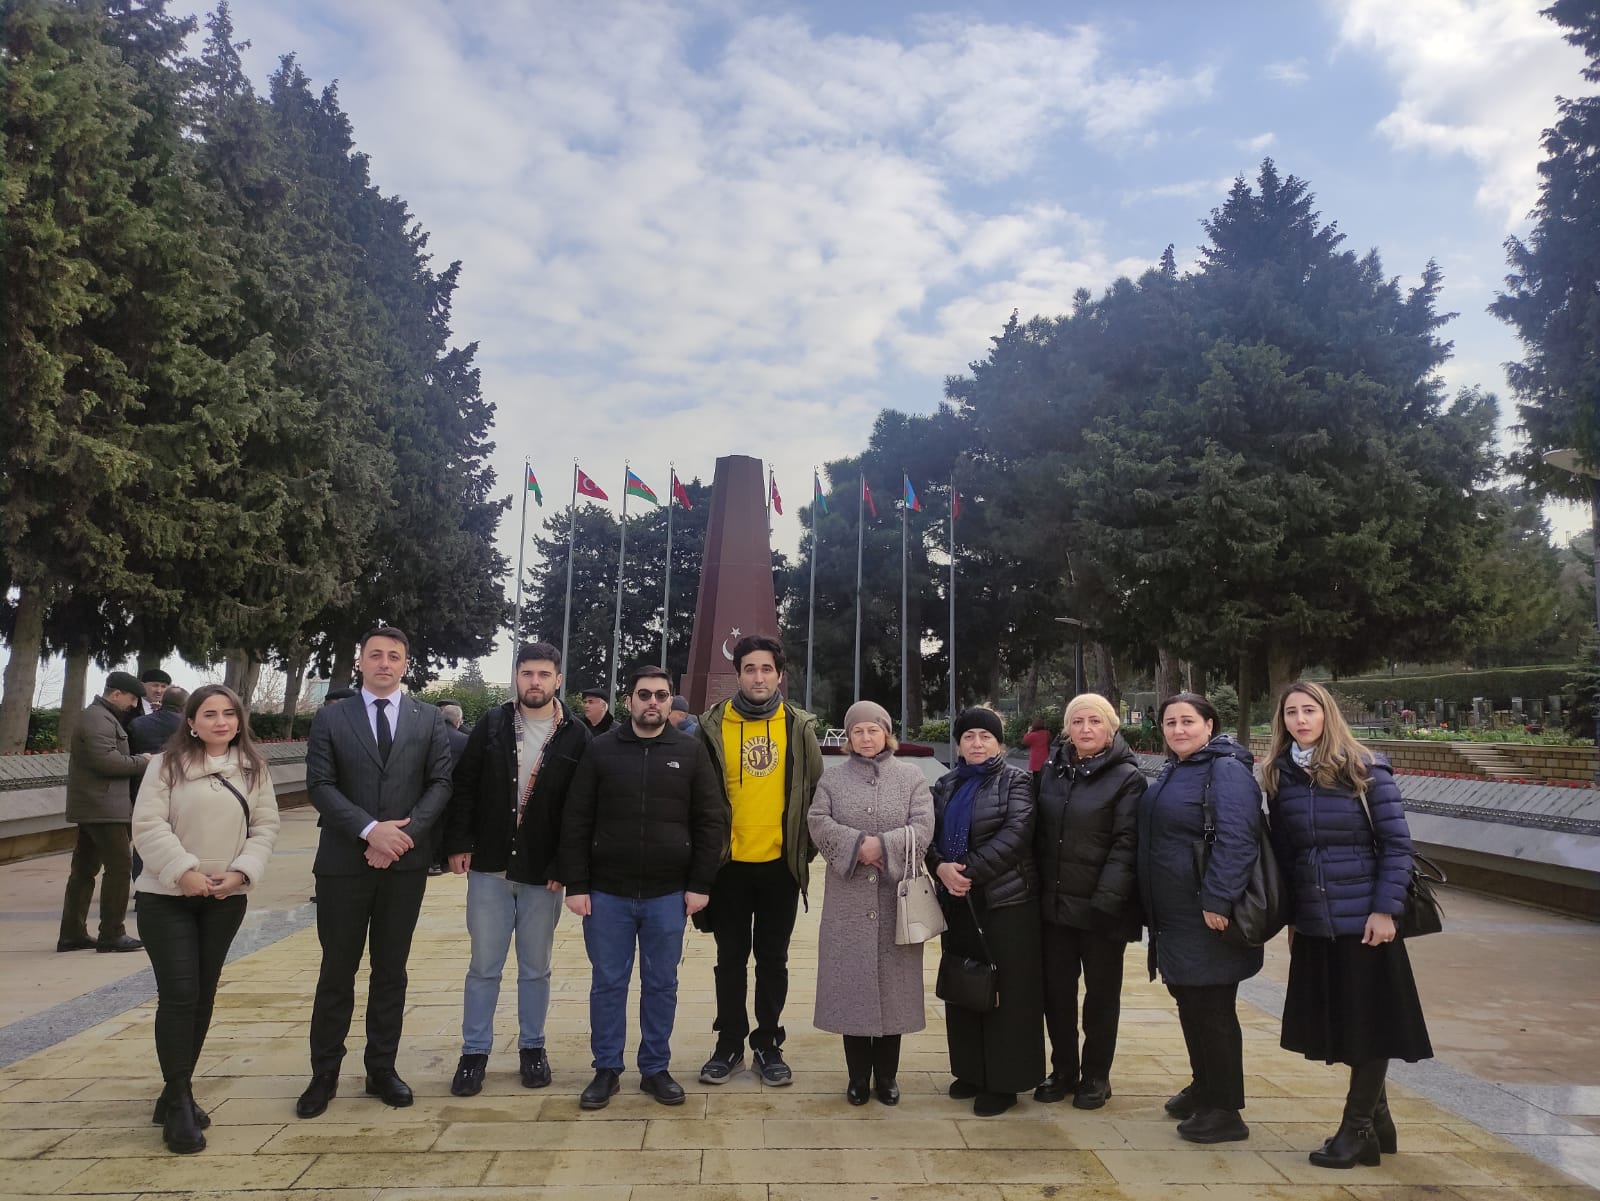 The  event dedicated to the 33rd anniversary of the “January 20 tragedy”  was held at the Institute of Soil Science and Agrochemistry. 